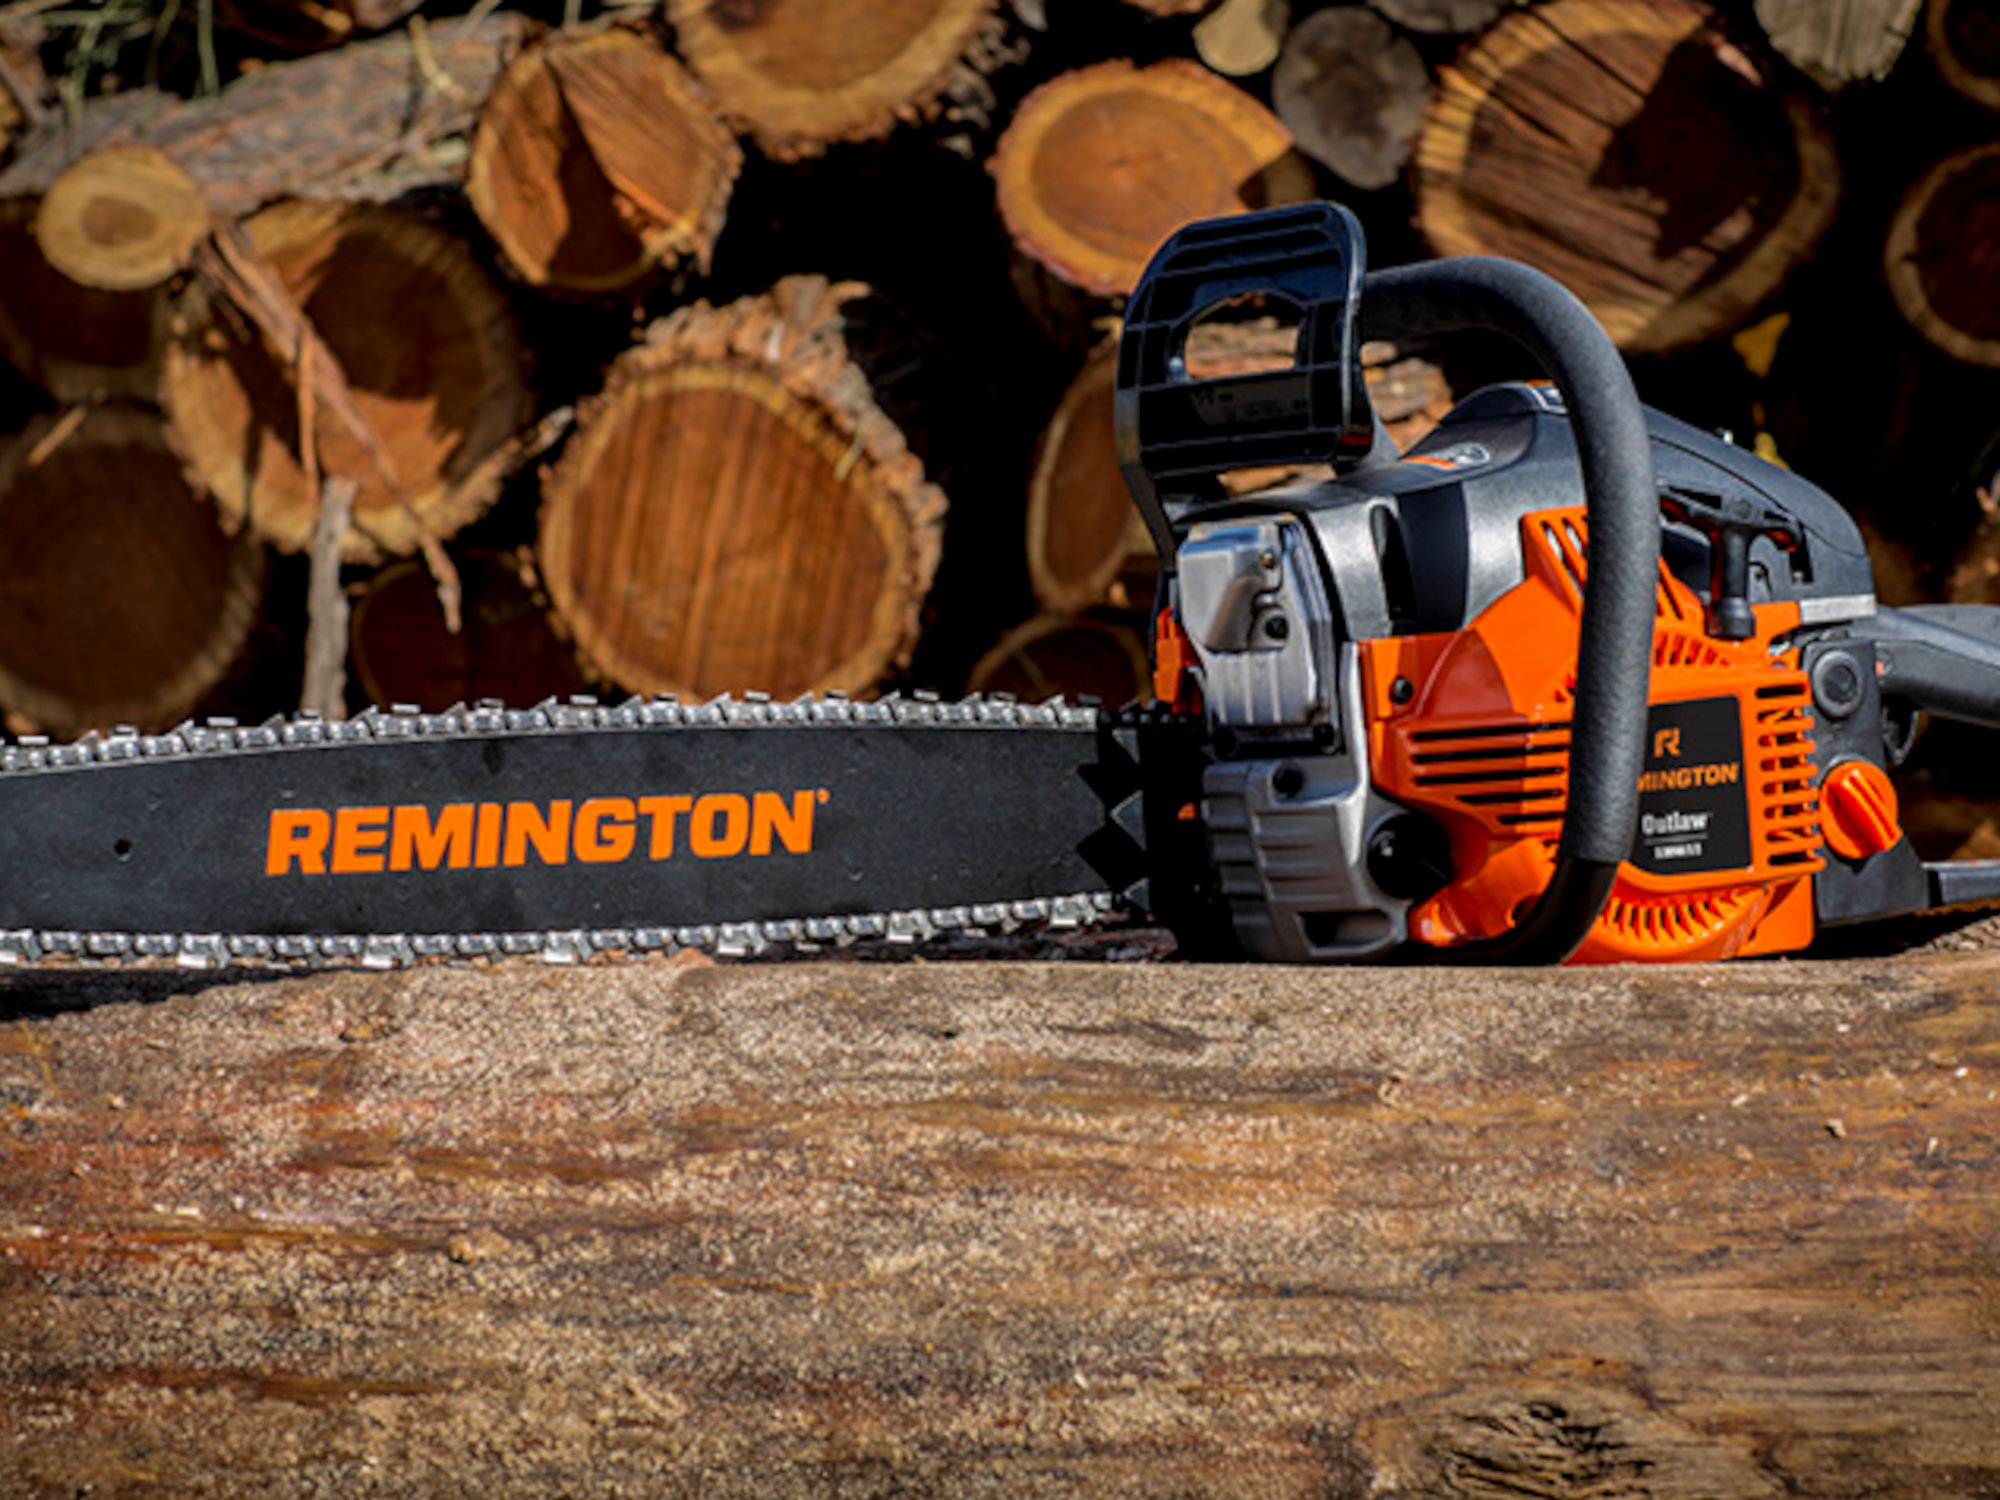 Remington RM4618 Outlaw chainsaw for bucking